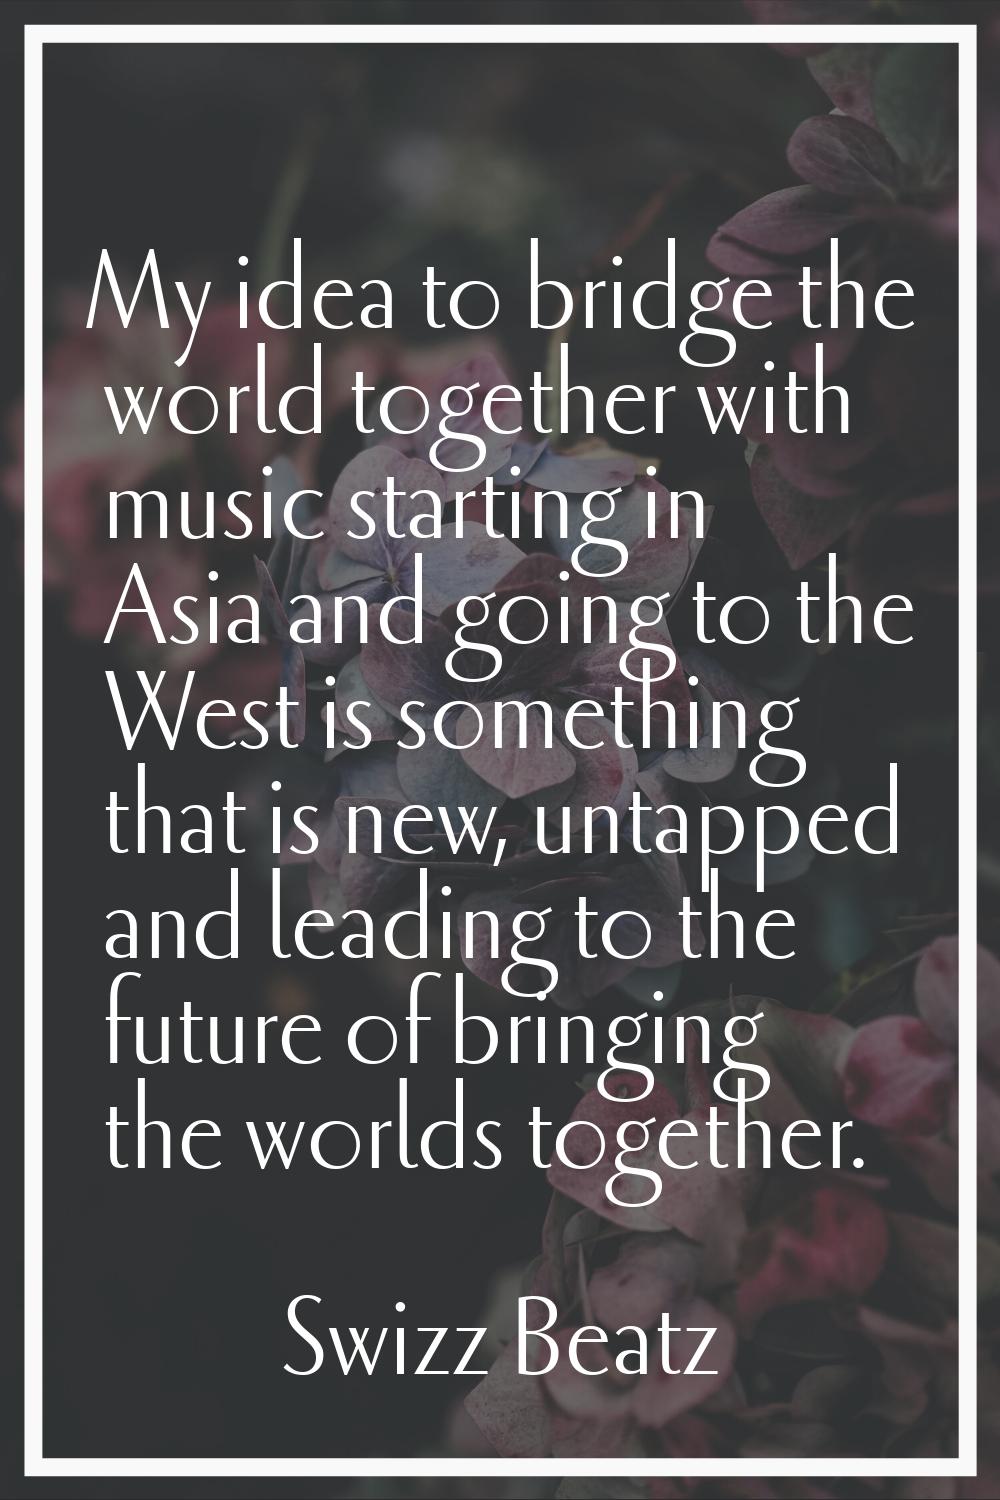 My idea to bridge the world together with music starting in Asia and going to the West is something